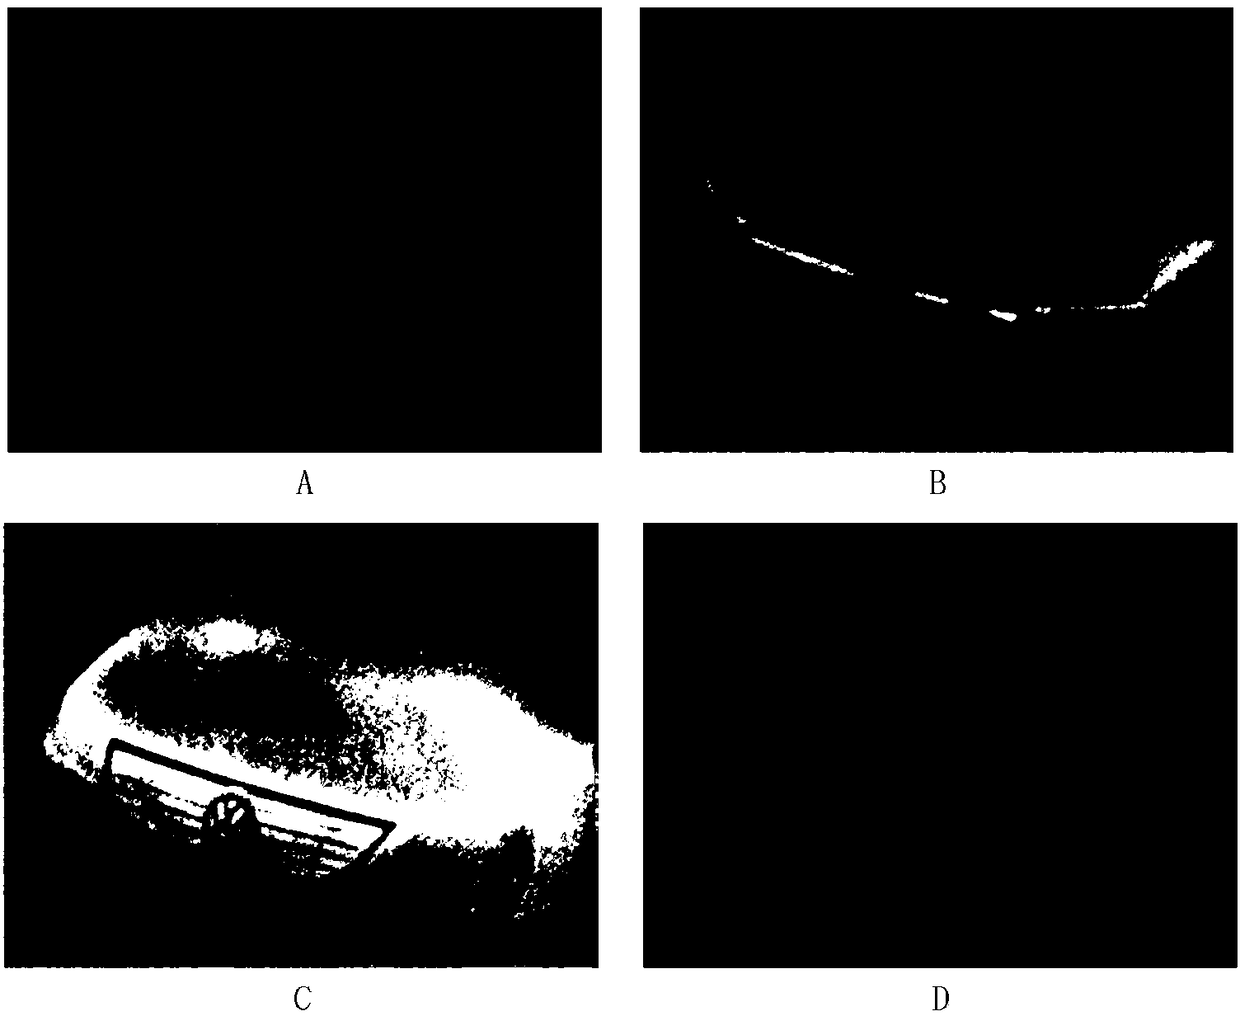 Adaptive infrared image enhancement method based on visual contrast resolution